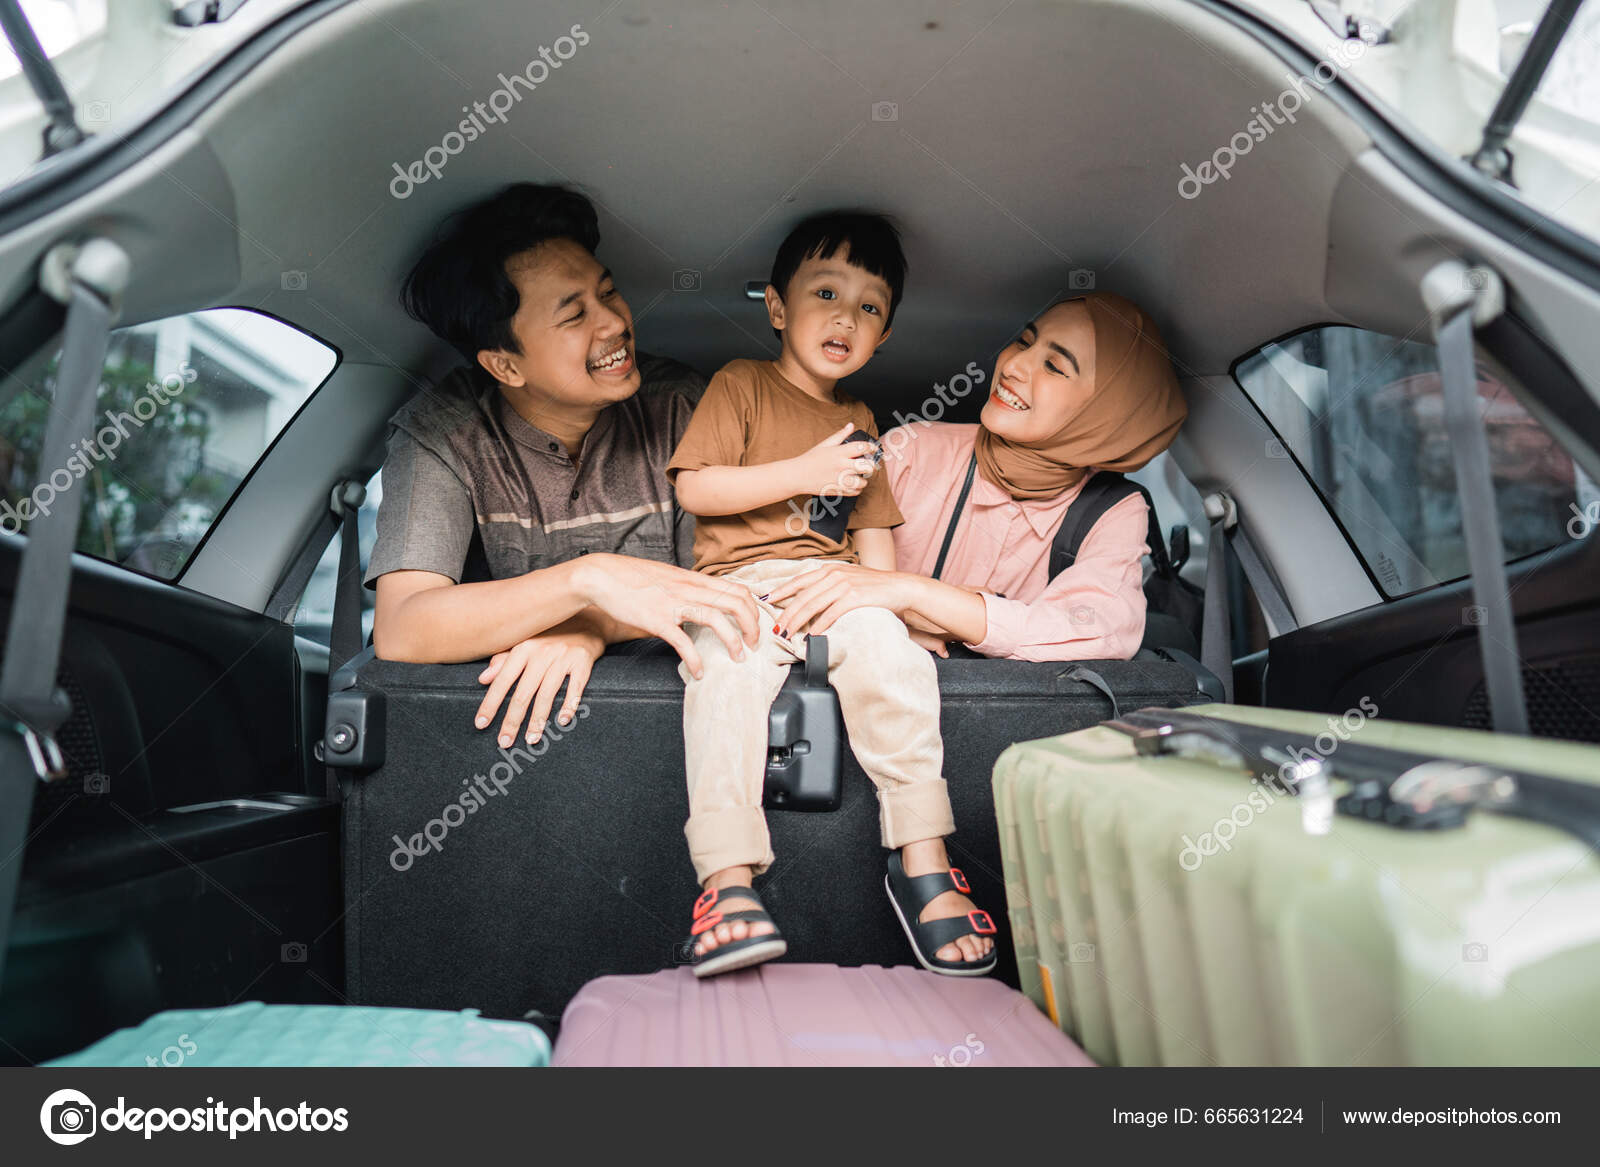 Home　Photo　Asian　Family　665631224　by　Going　Stock　Trip　Road　Eid　Back　©odua　Happy　Muslim